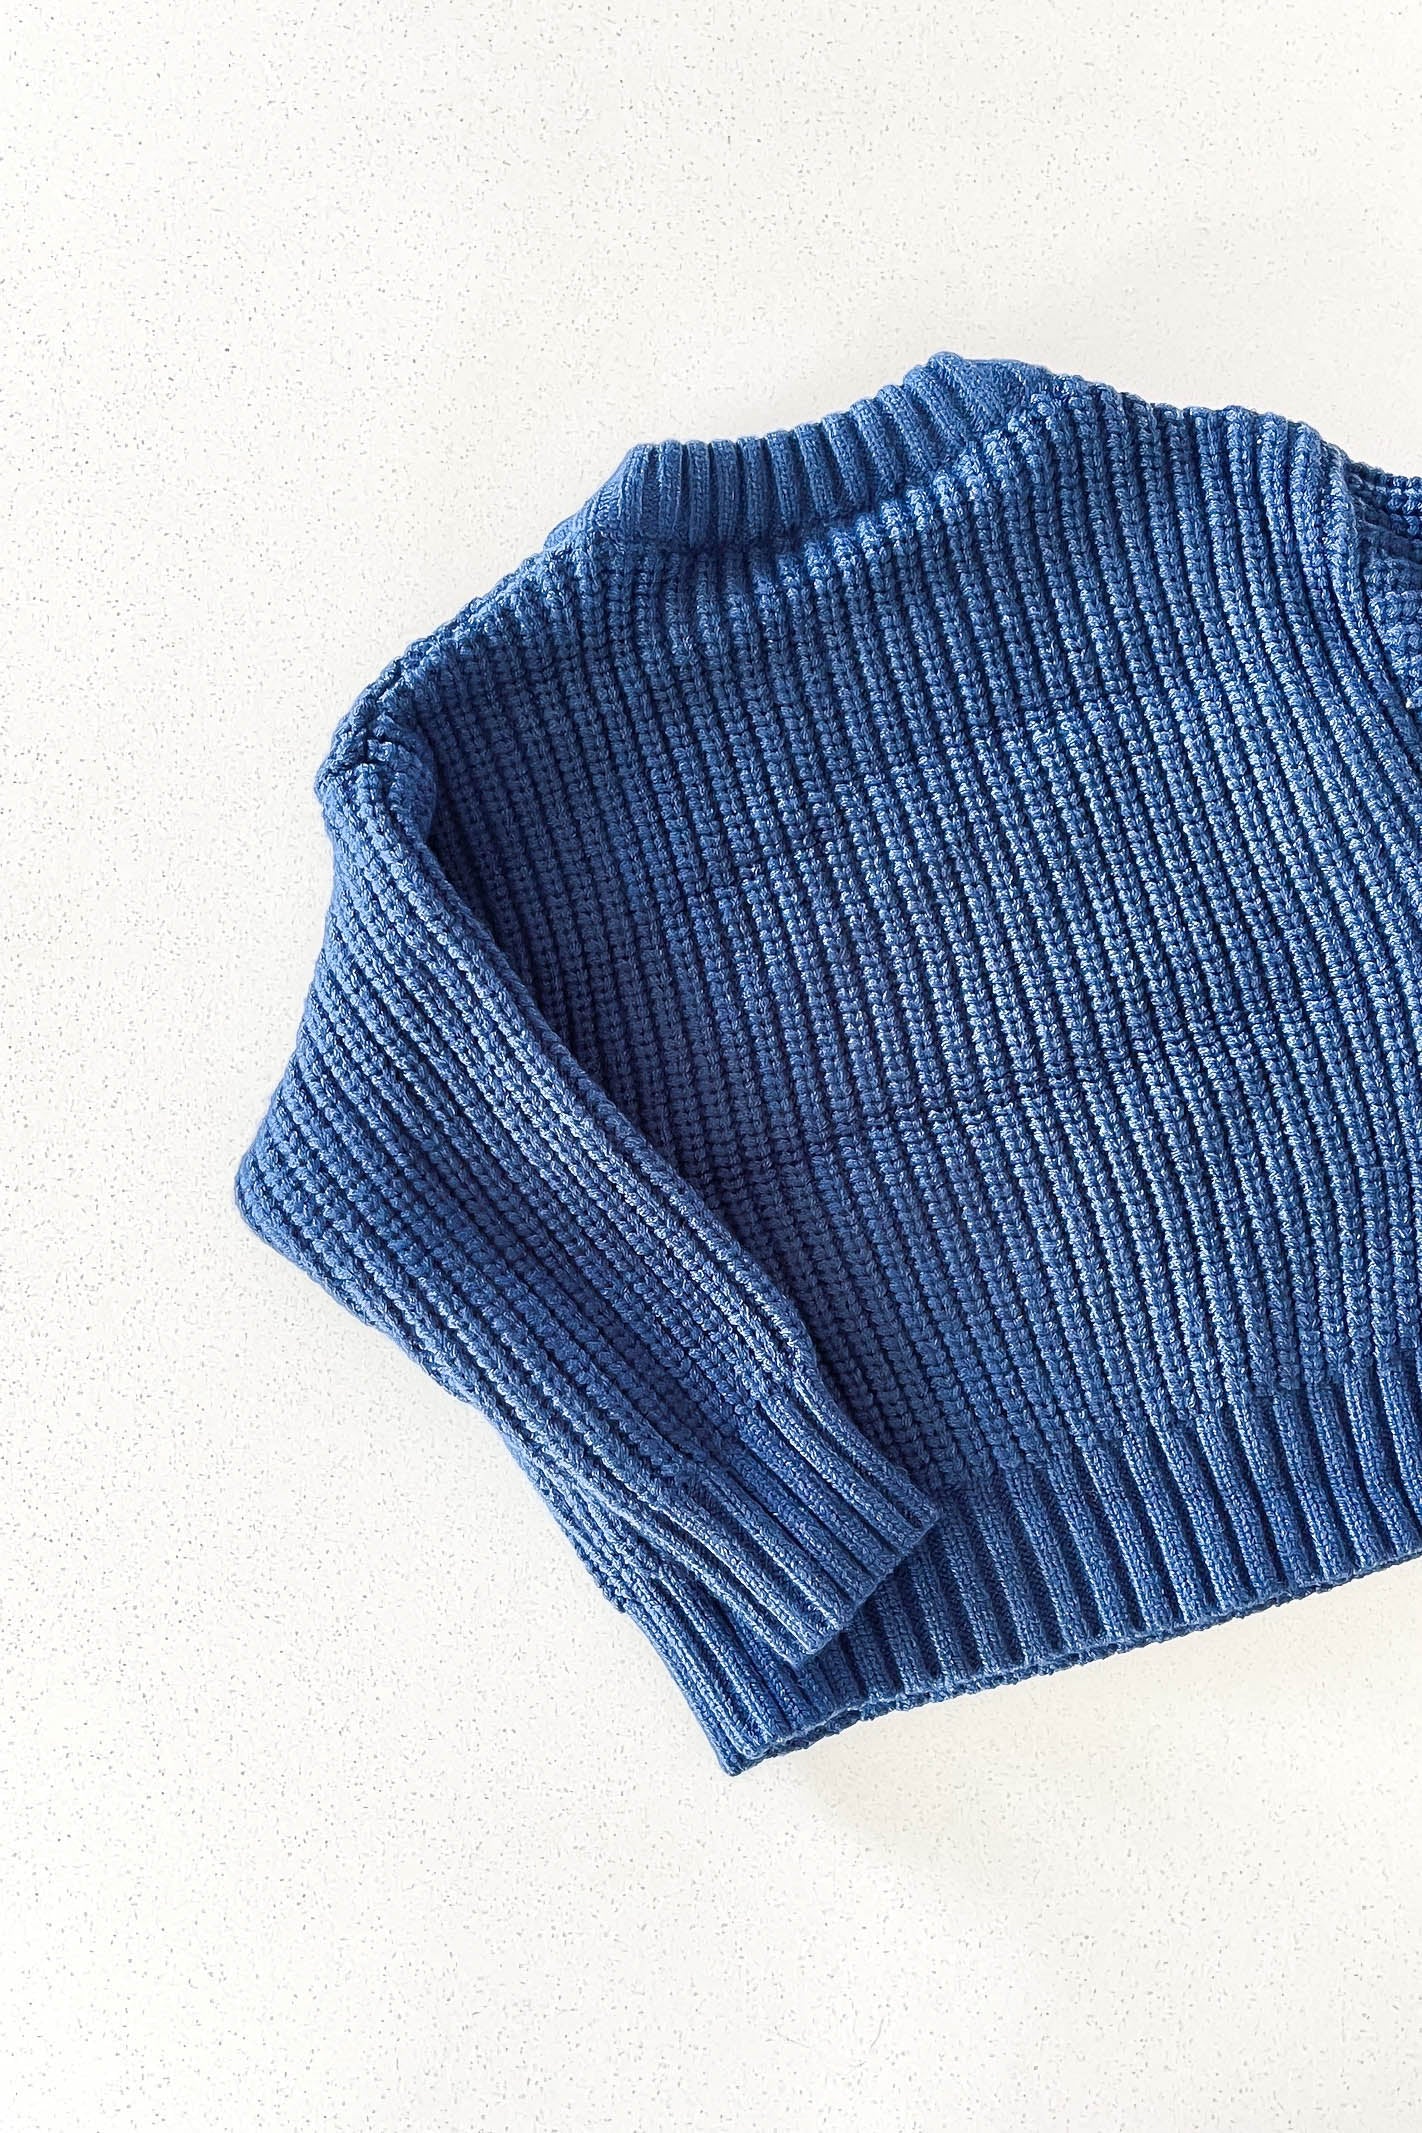 Baby Navy Knit Sweater